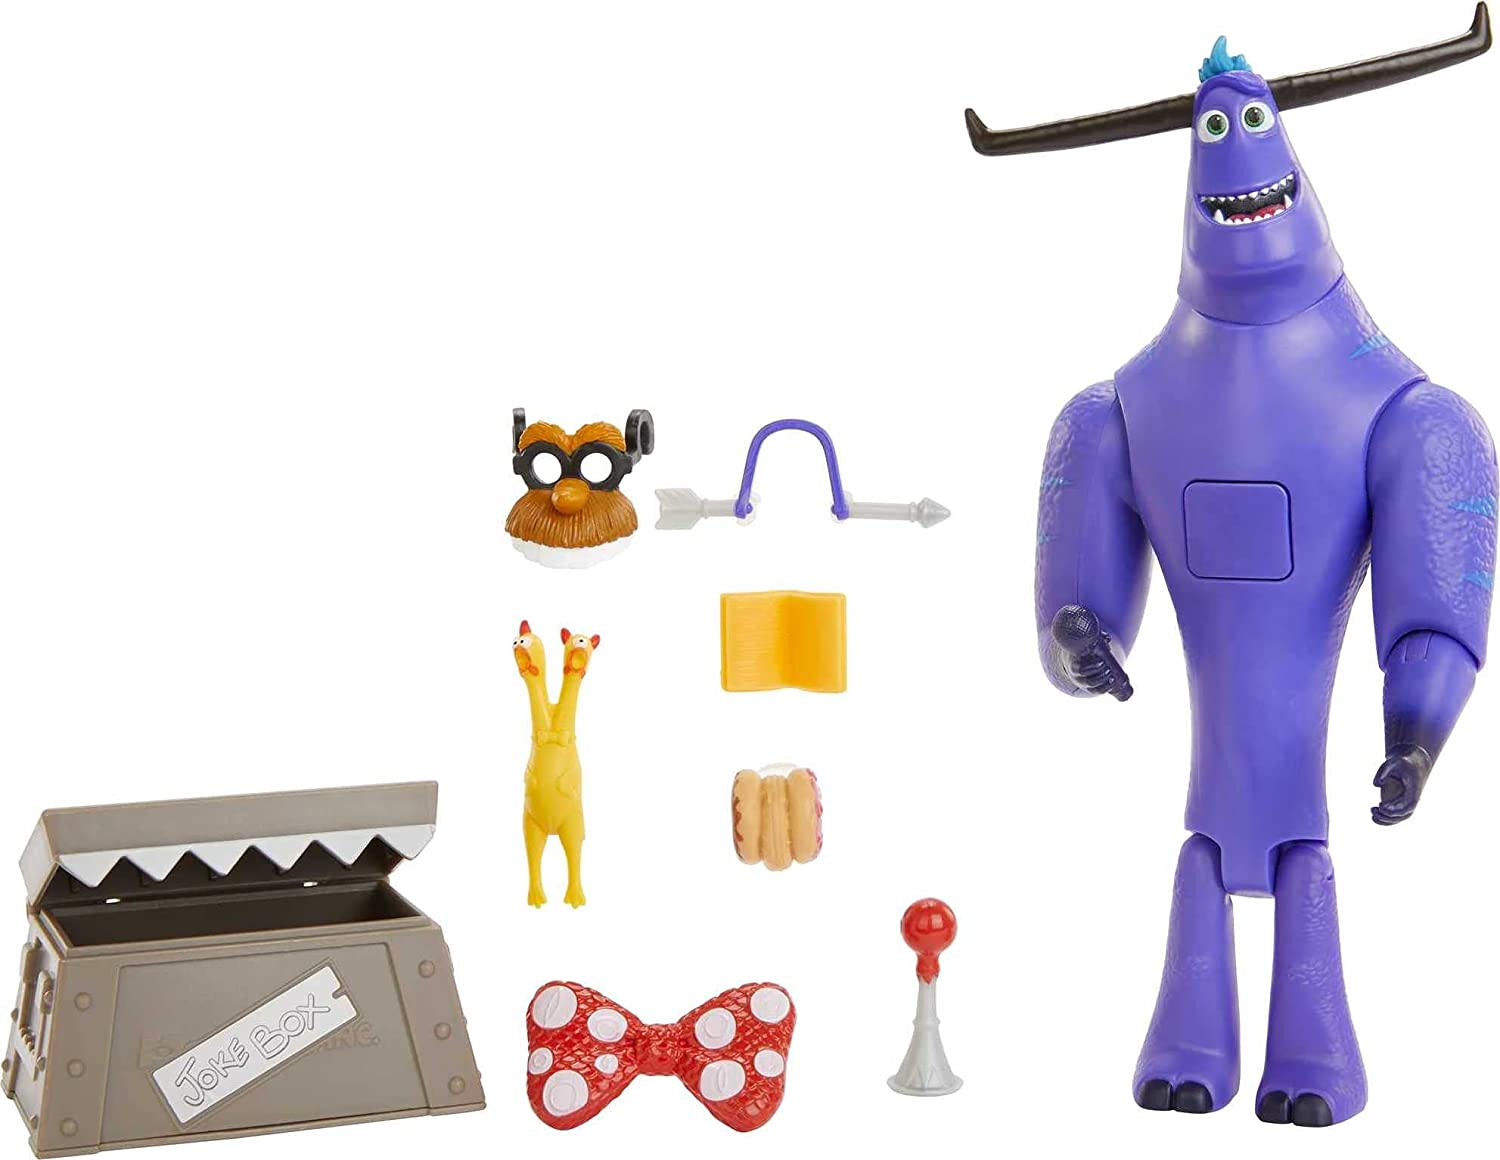 Monsters at Work Tylor Tuskmon The Jokester Feature Figure Talking Interactive Disney Plus Character Toy with Accessories, Posable Authentic Look & So